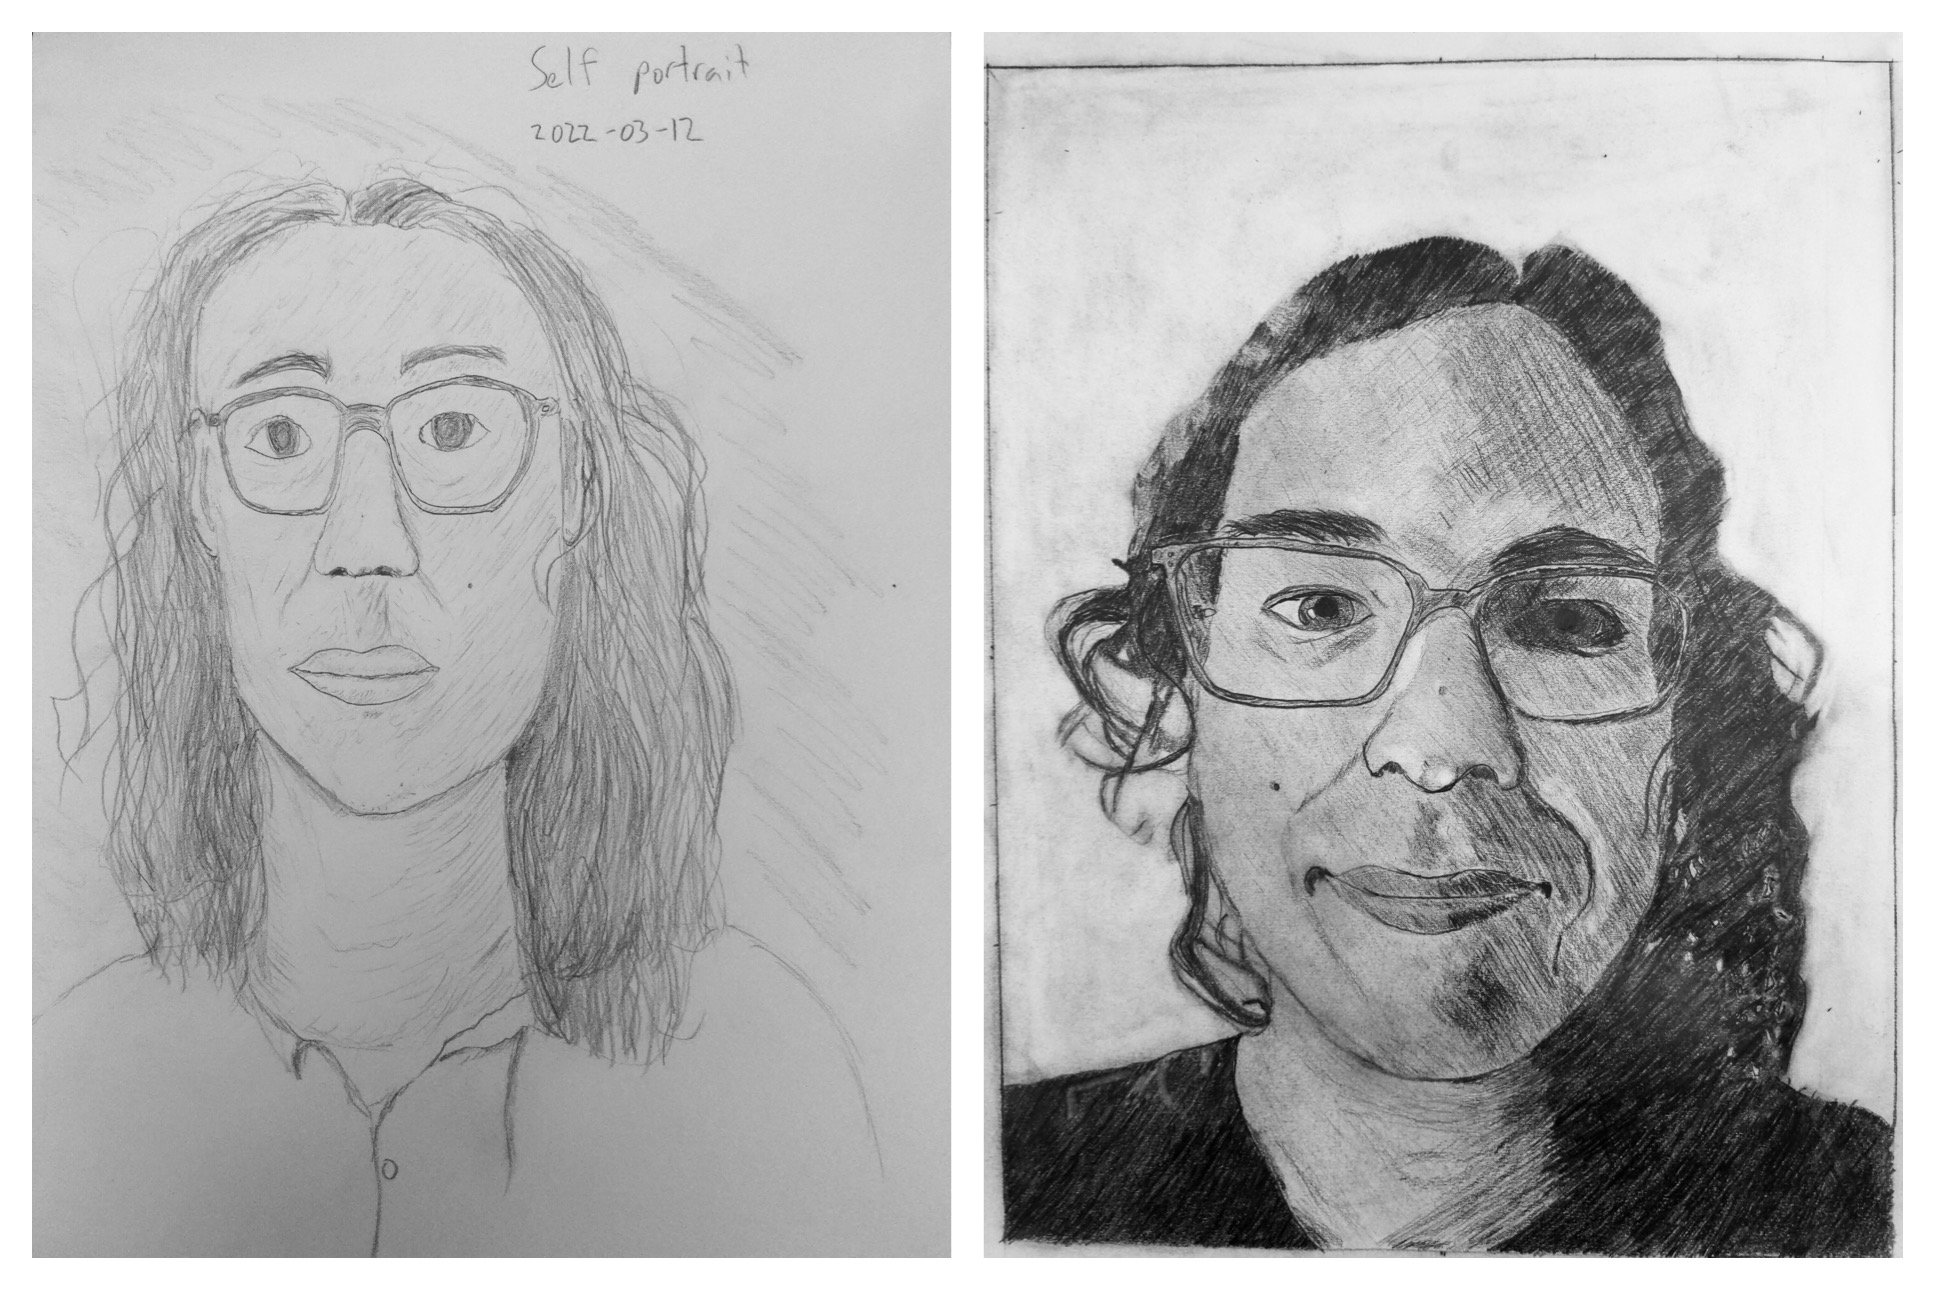 Ethan's Before and After Self-Portraits March 14-18, 2022